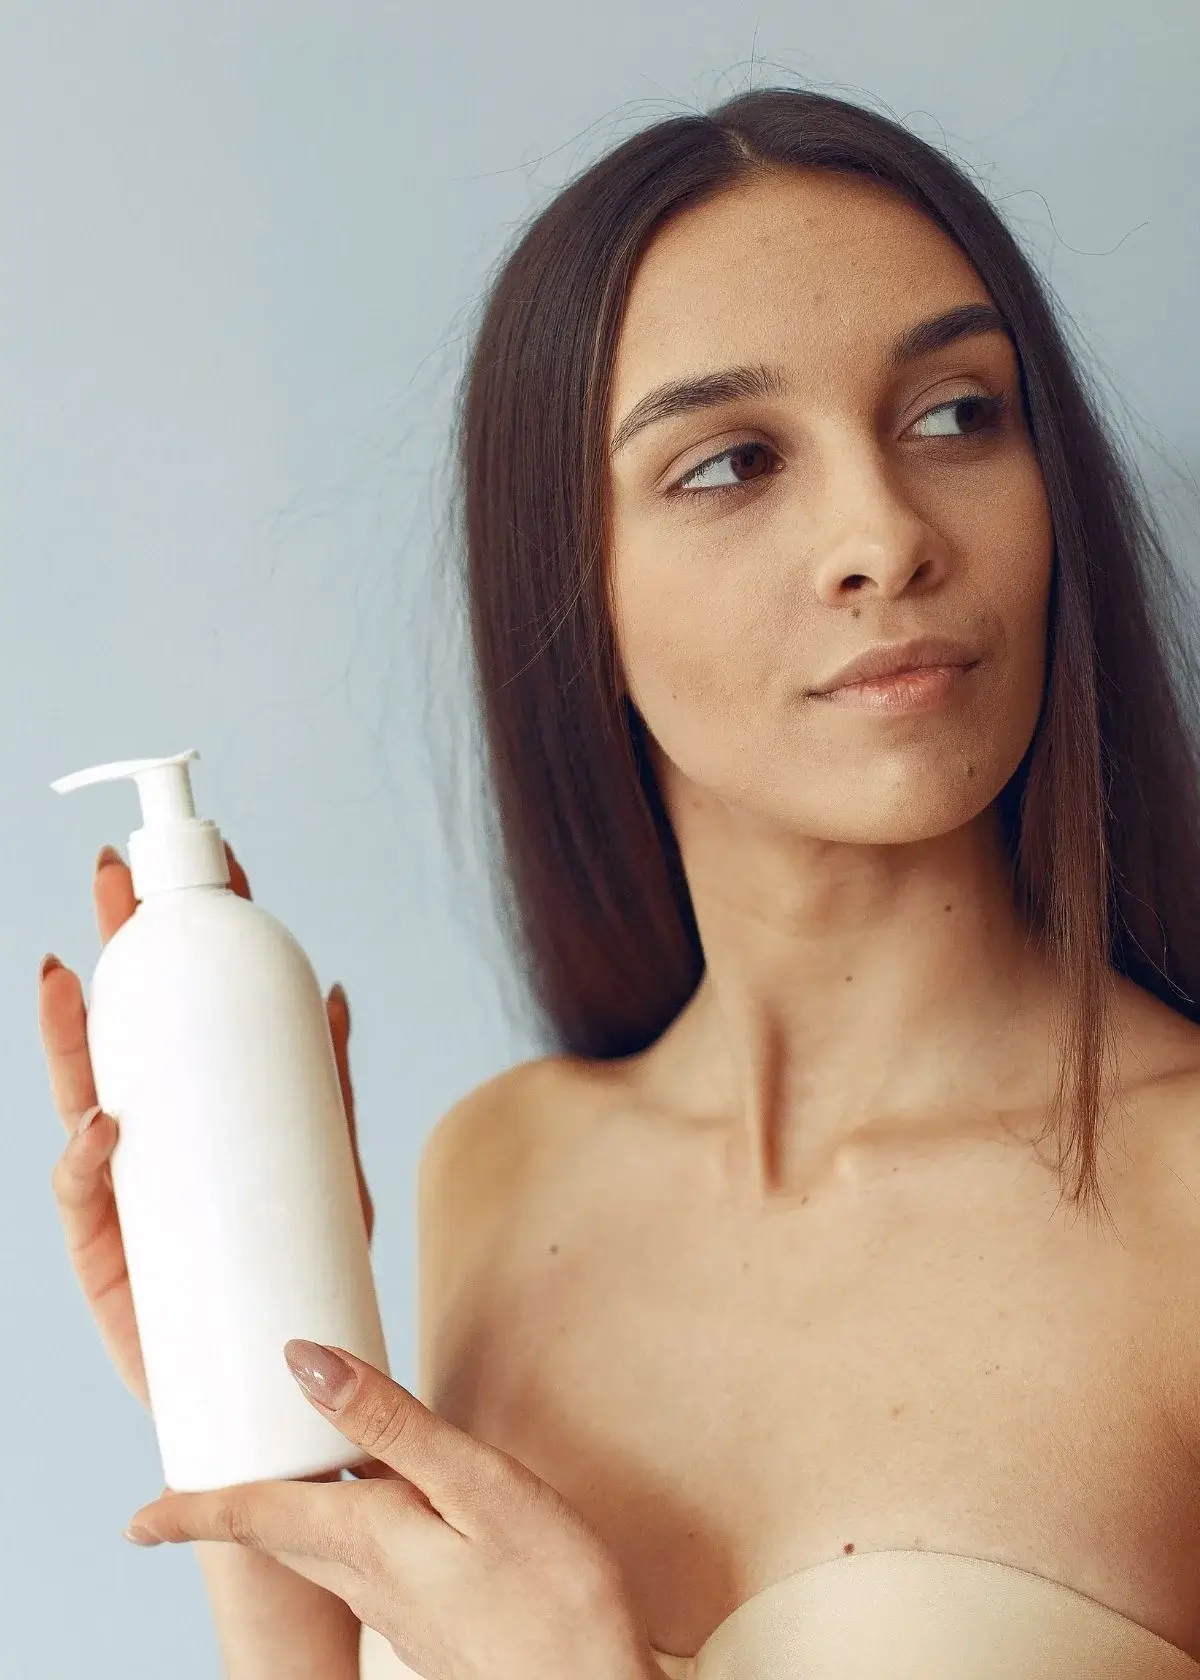 Can shampoo and conditioner really promote hair growth?